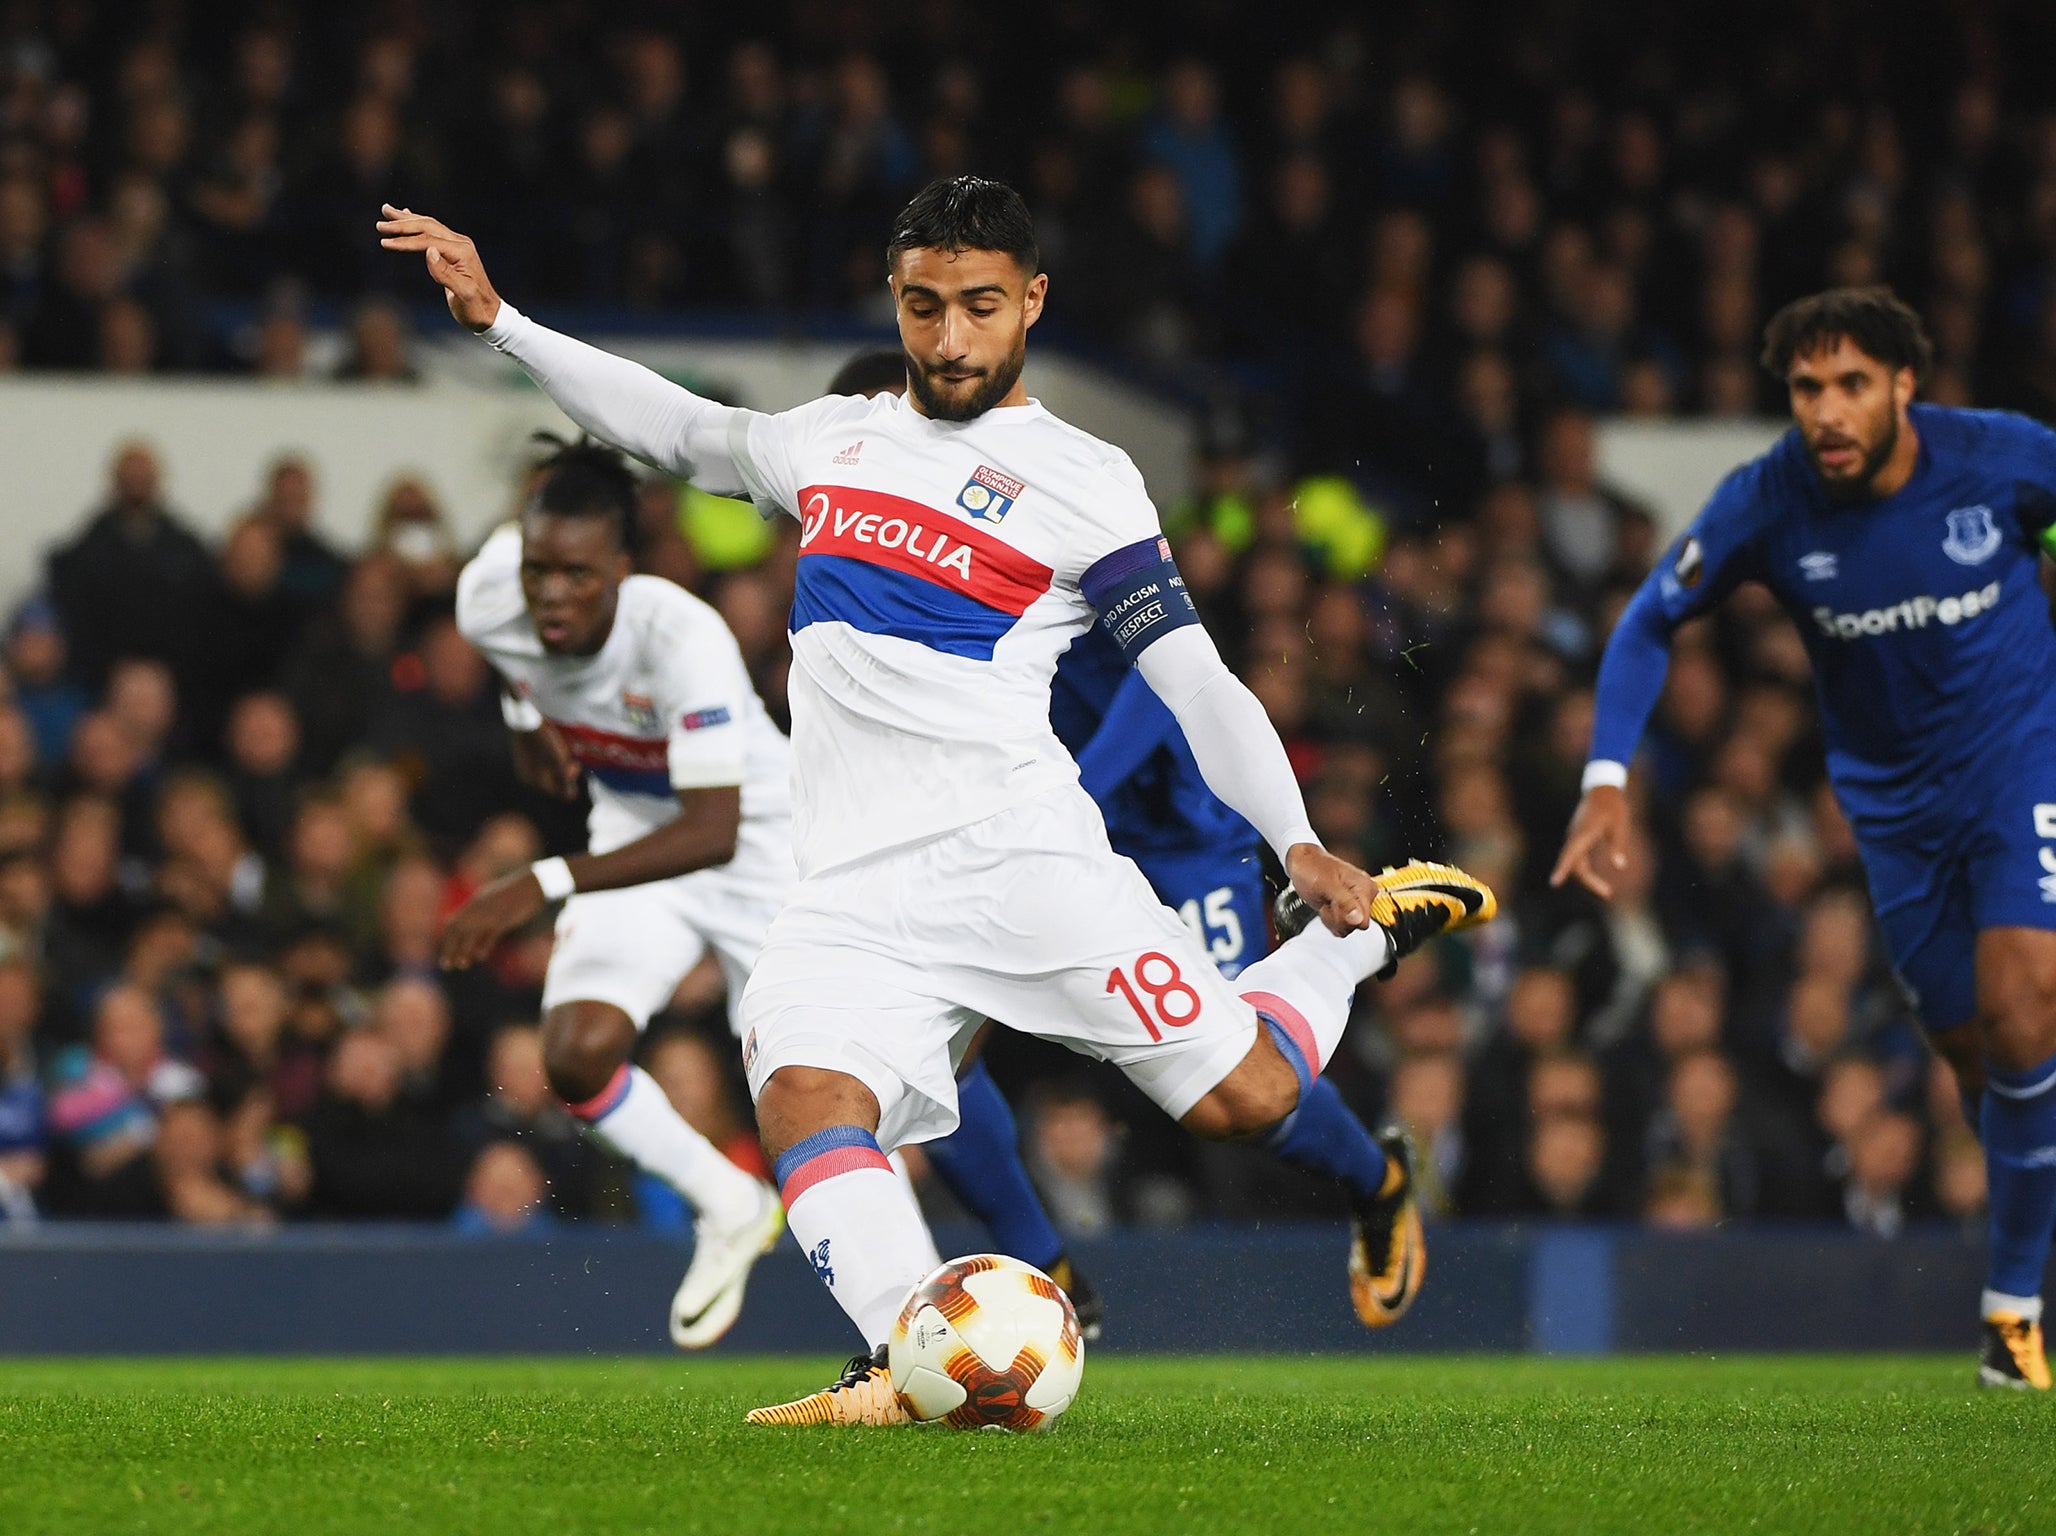 Fekir put Everton in front from the spot